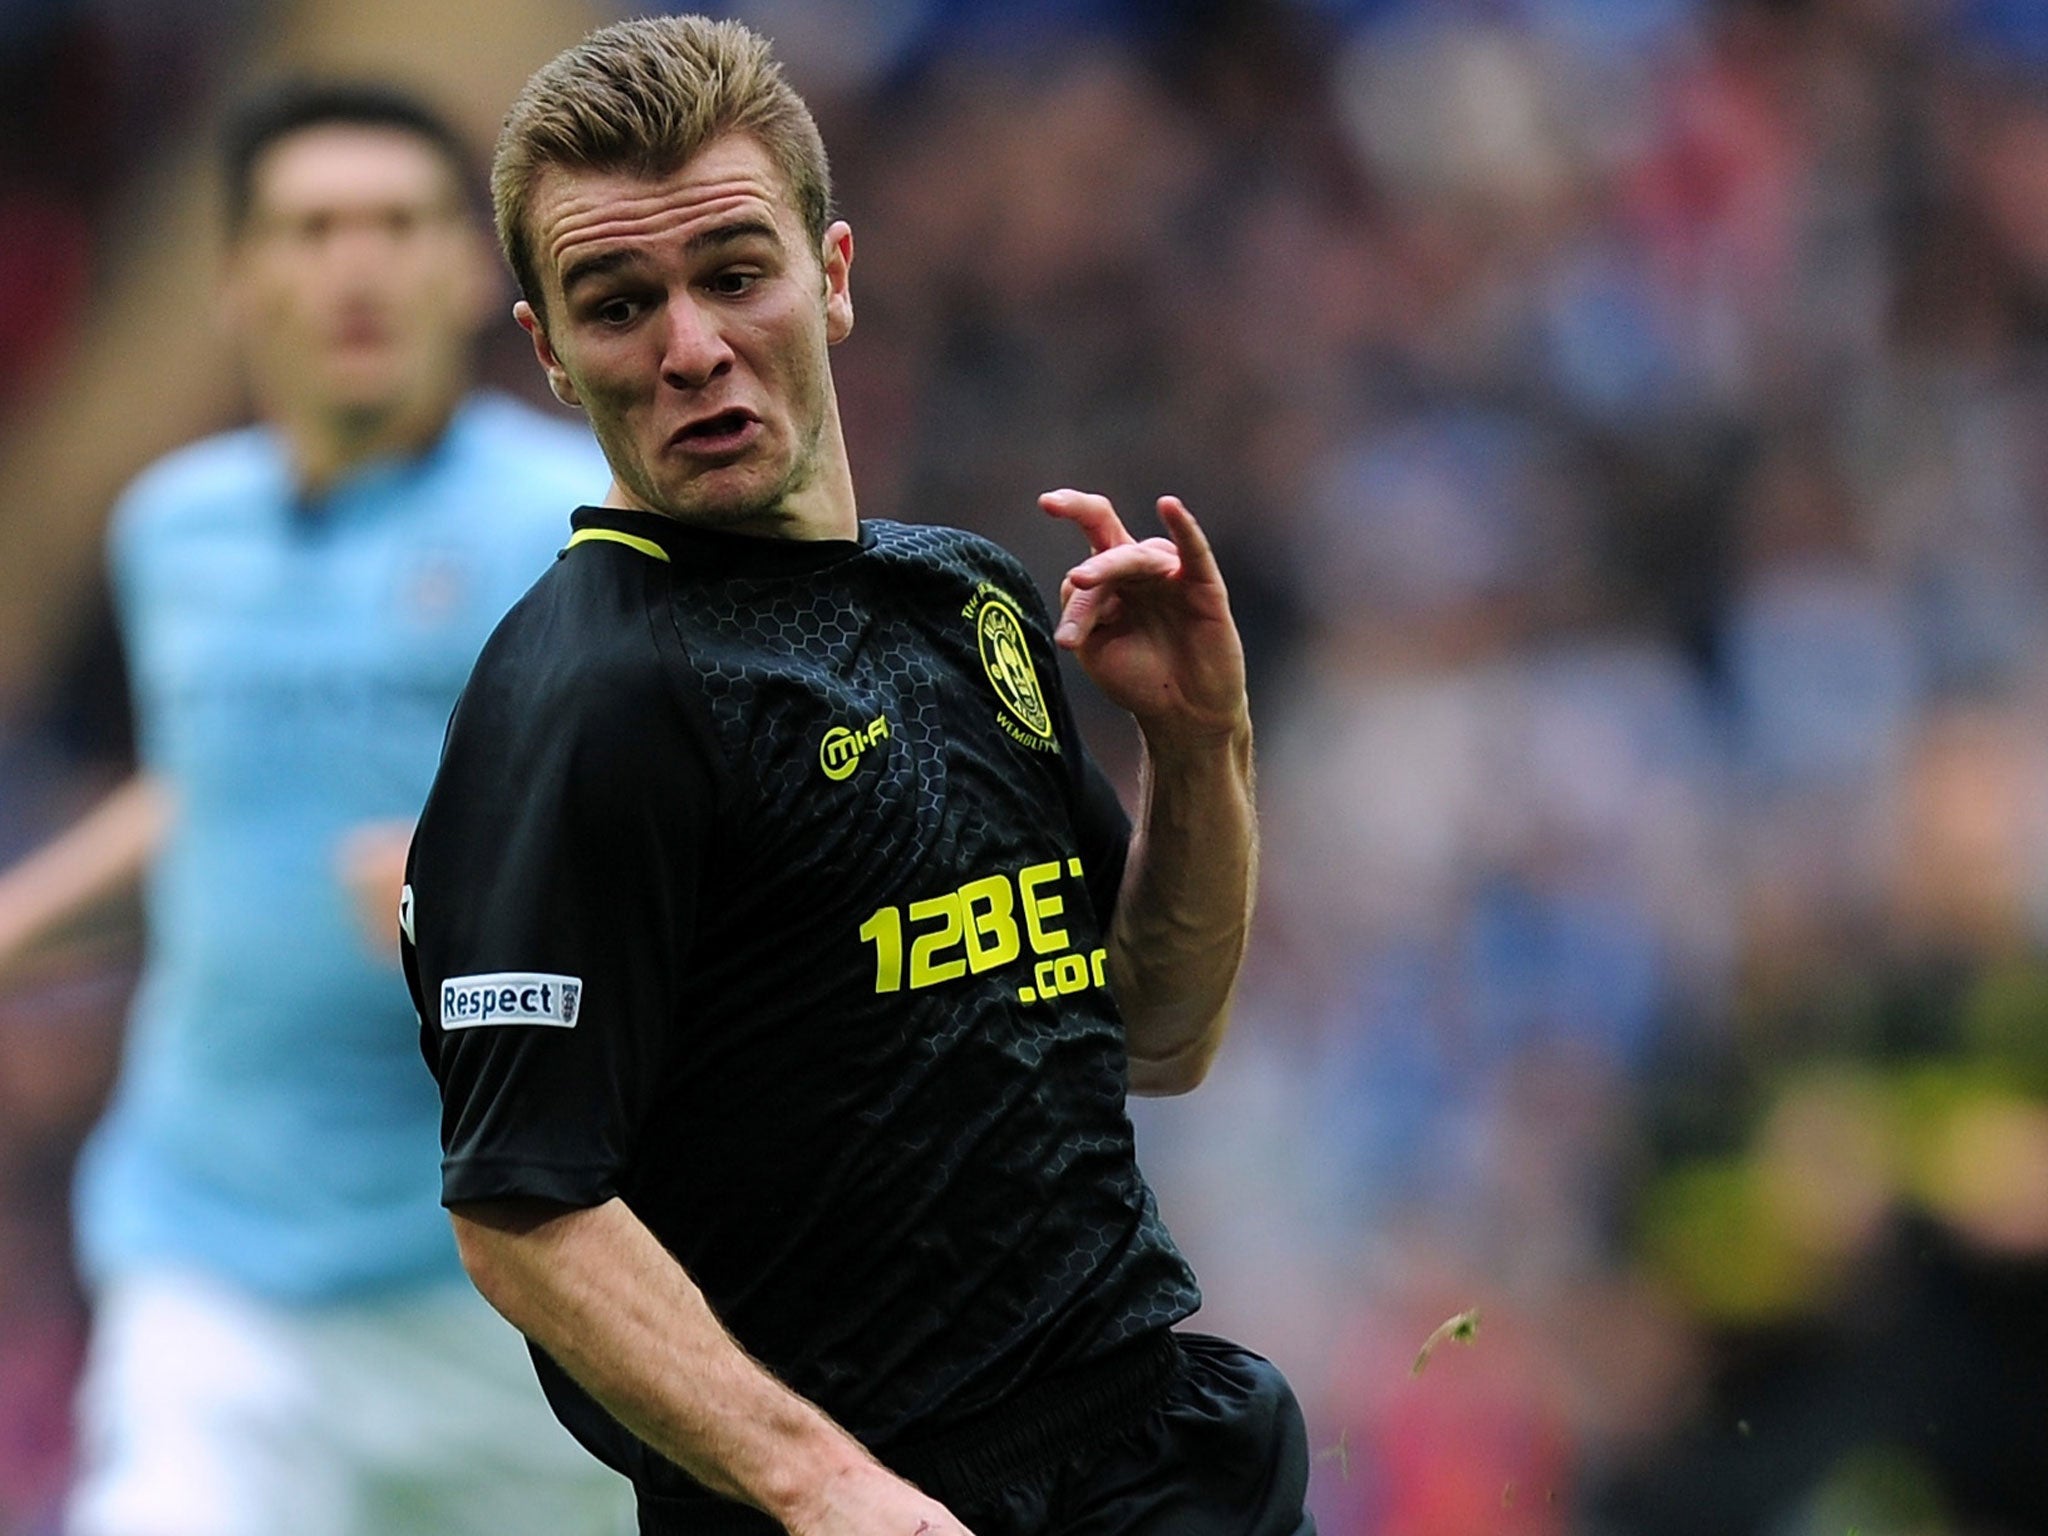 The player who set the tone yesterday was another fresh native talent, Callum McManaman